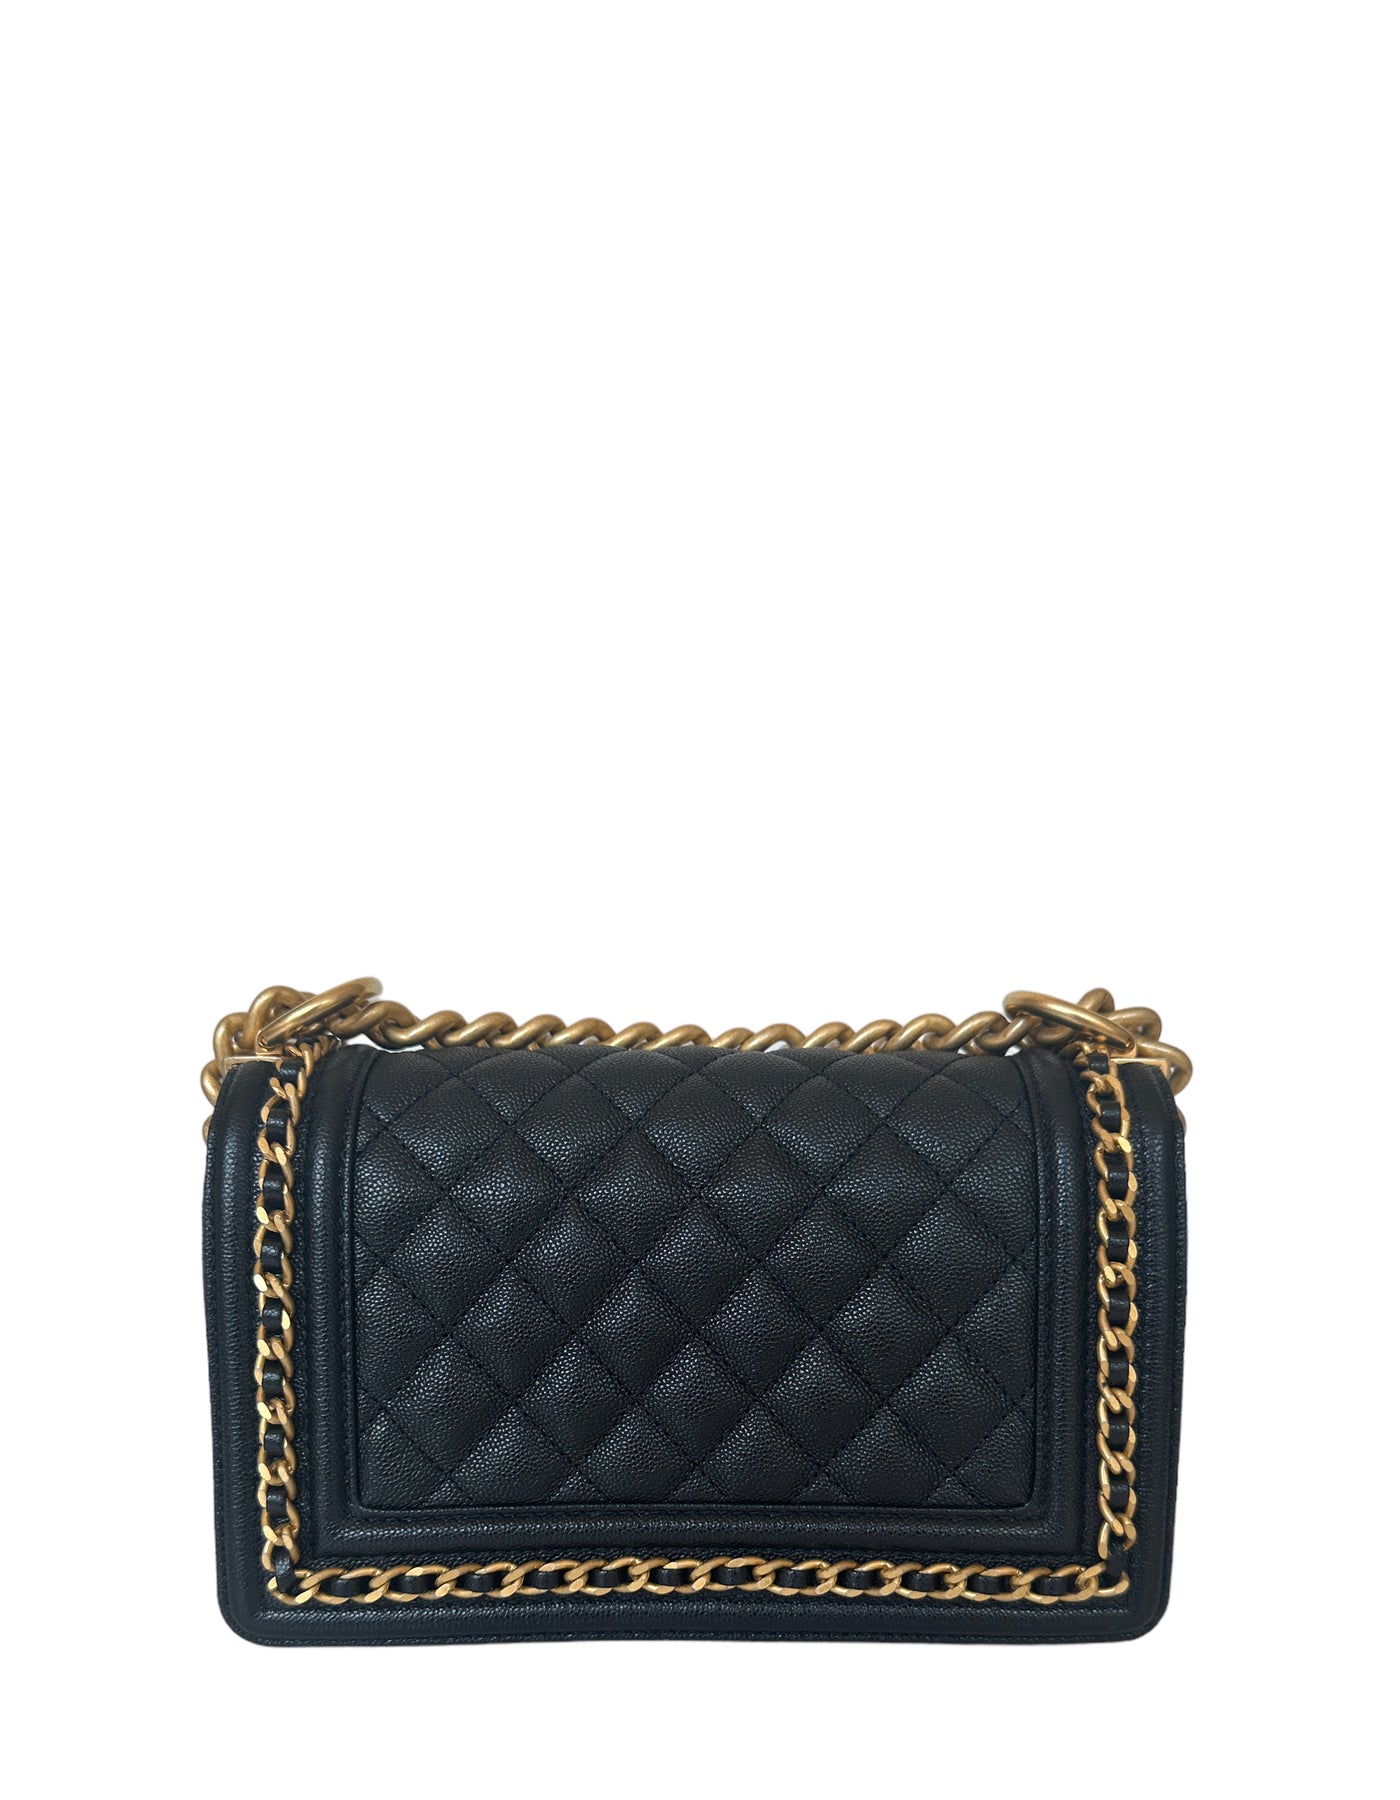 Chanel Black Caviar Leather Small Quilted Chain Around Boy Bag